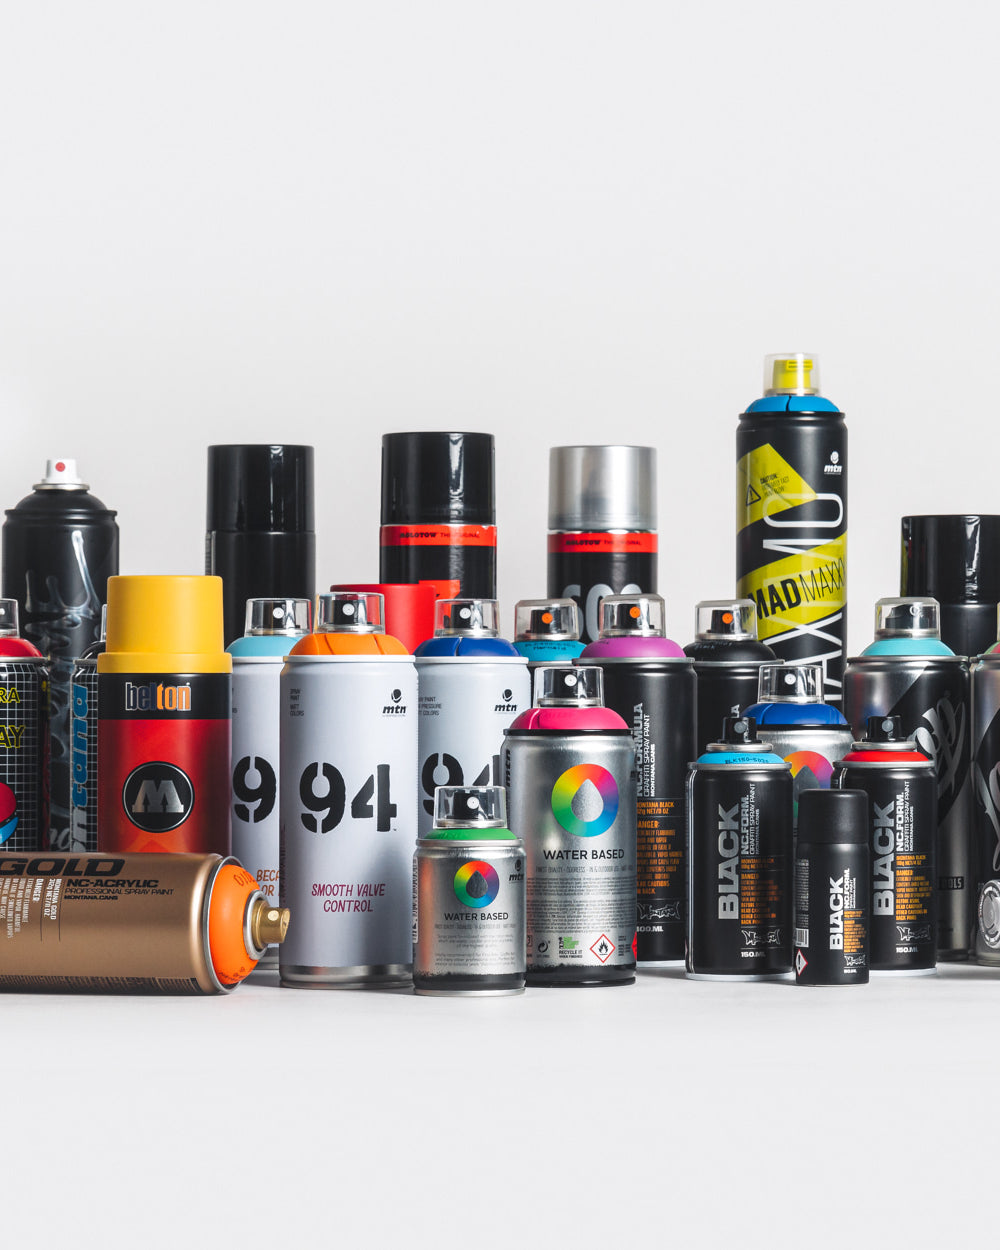 A variety of spray cans and other graffiti cans neatly arranged together.